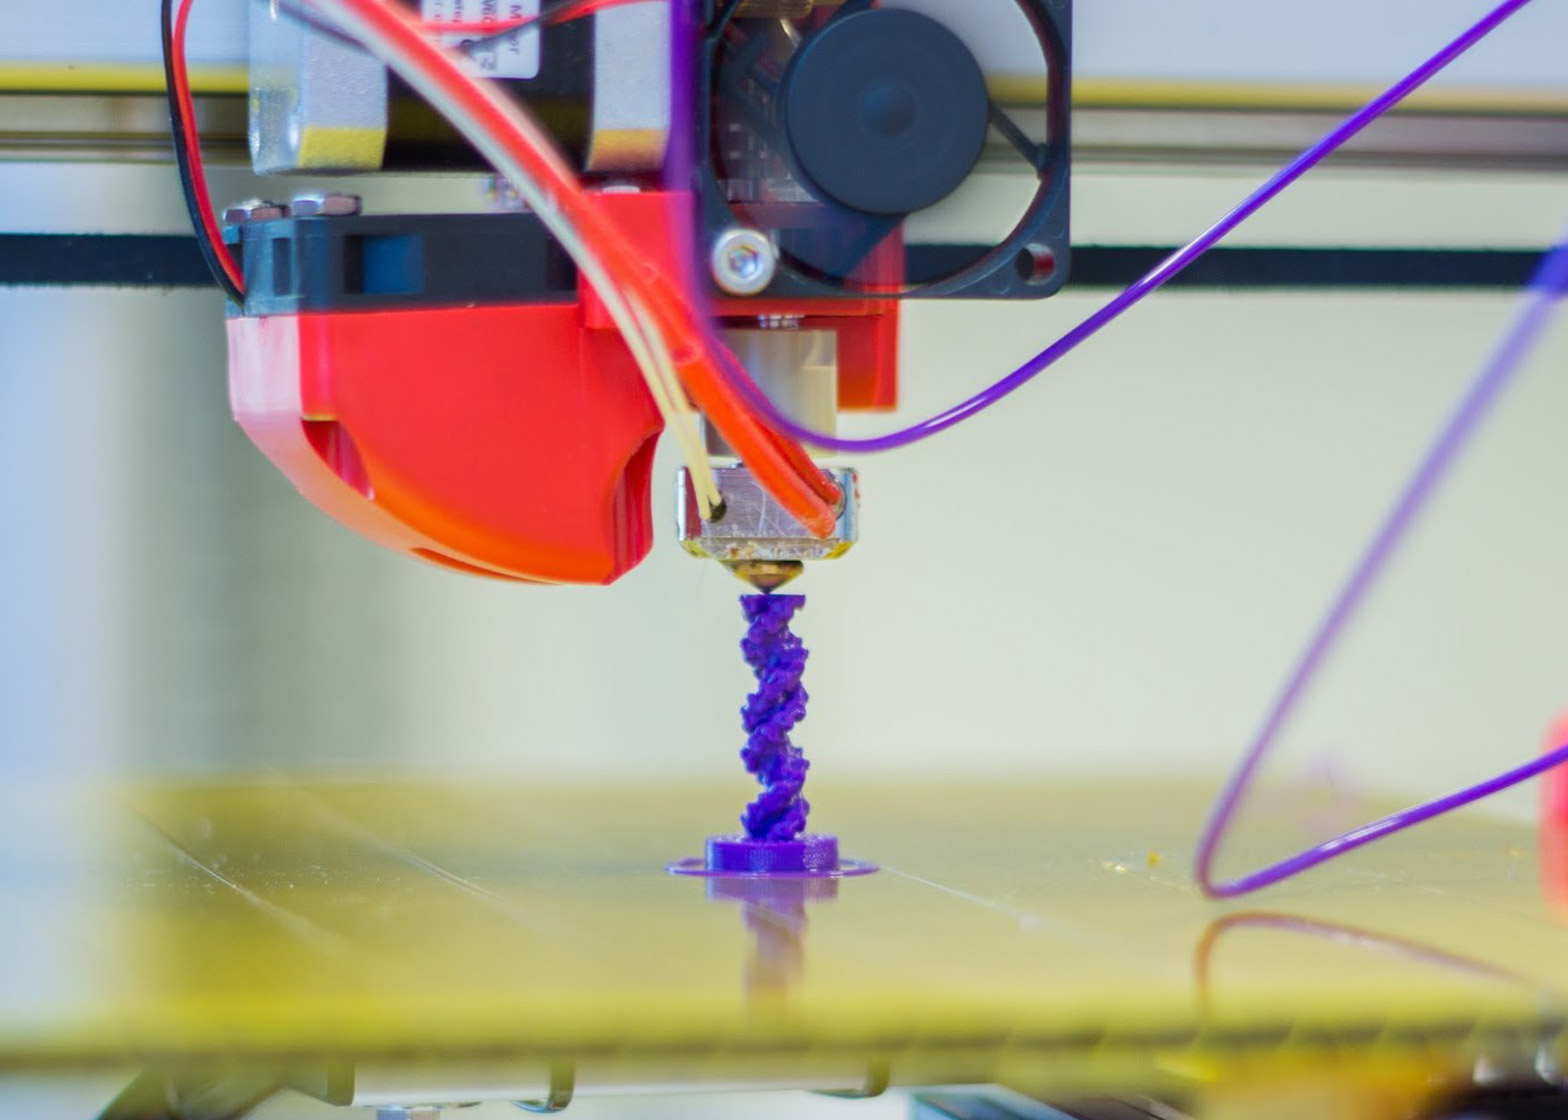 3d-printing-causes-harmful-health-effects-illinois-institute-of-technology_dezeen_ban.jpg